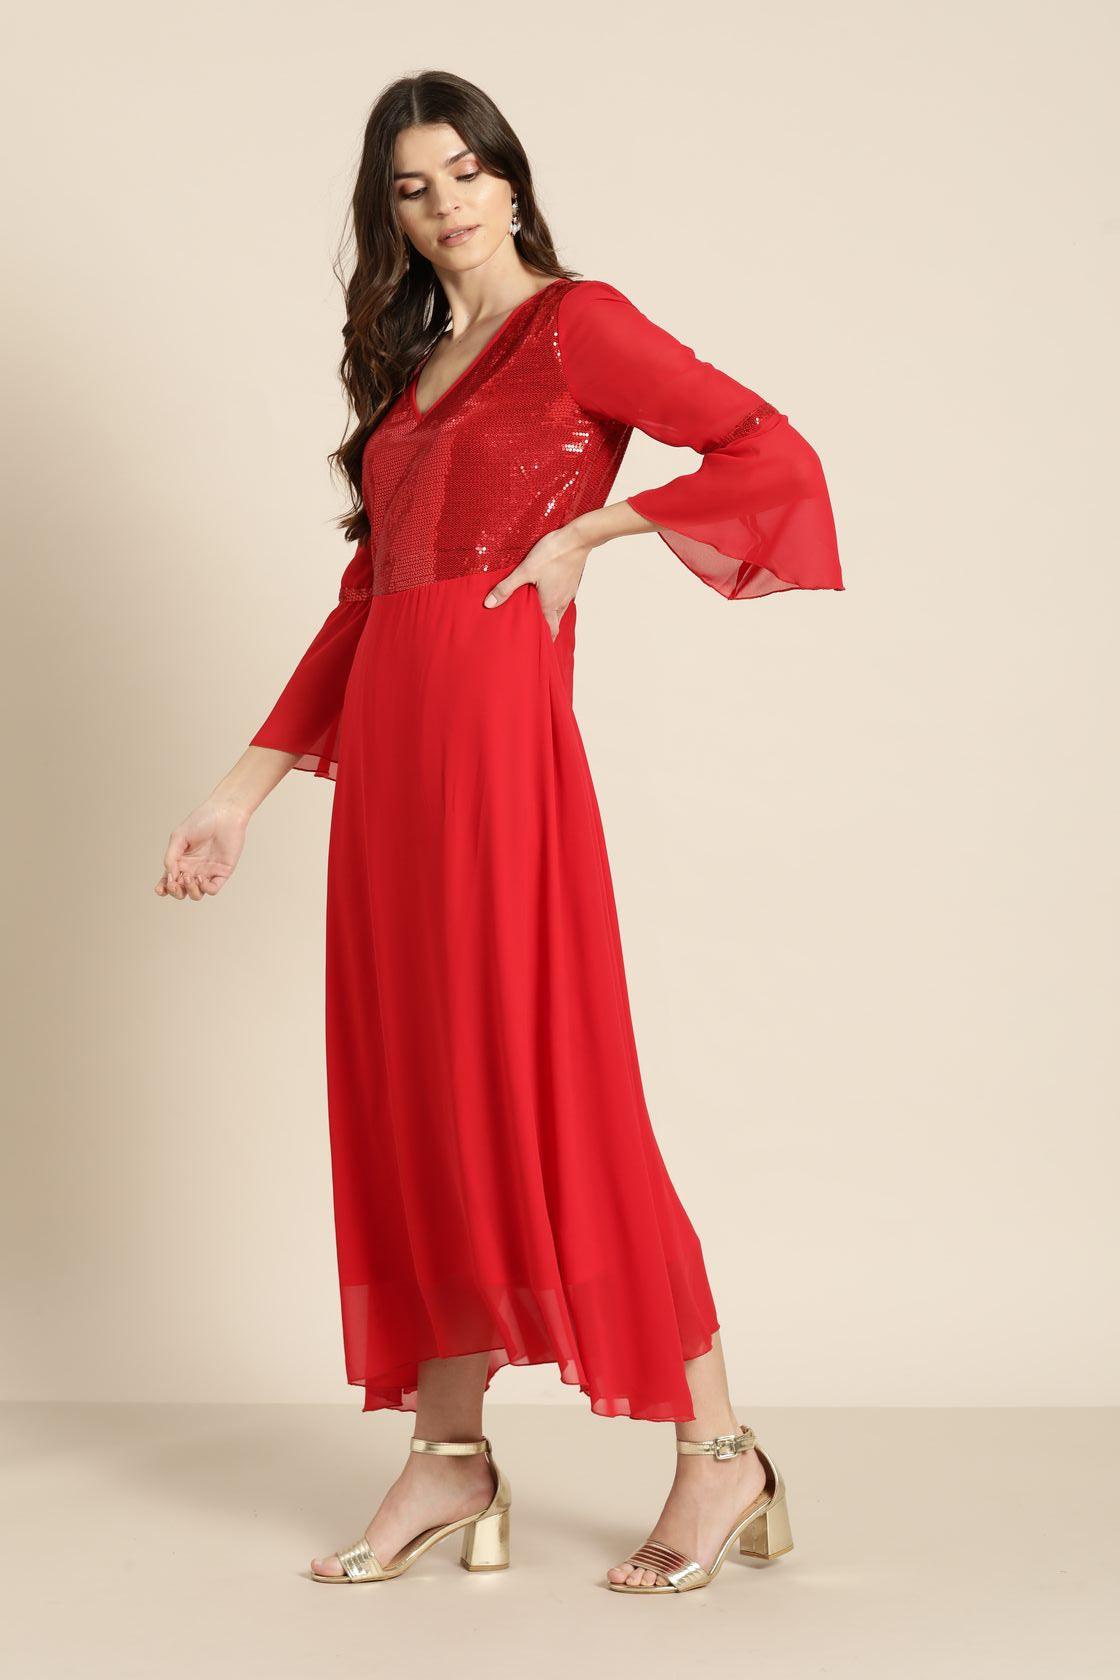 Qurvii Red Floral A Line Dress With Net Yoke And Sleeves - Qurvii India